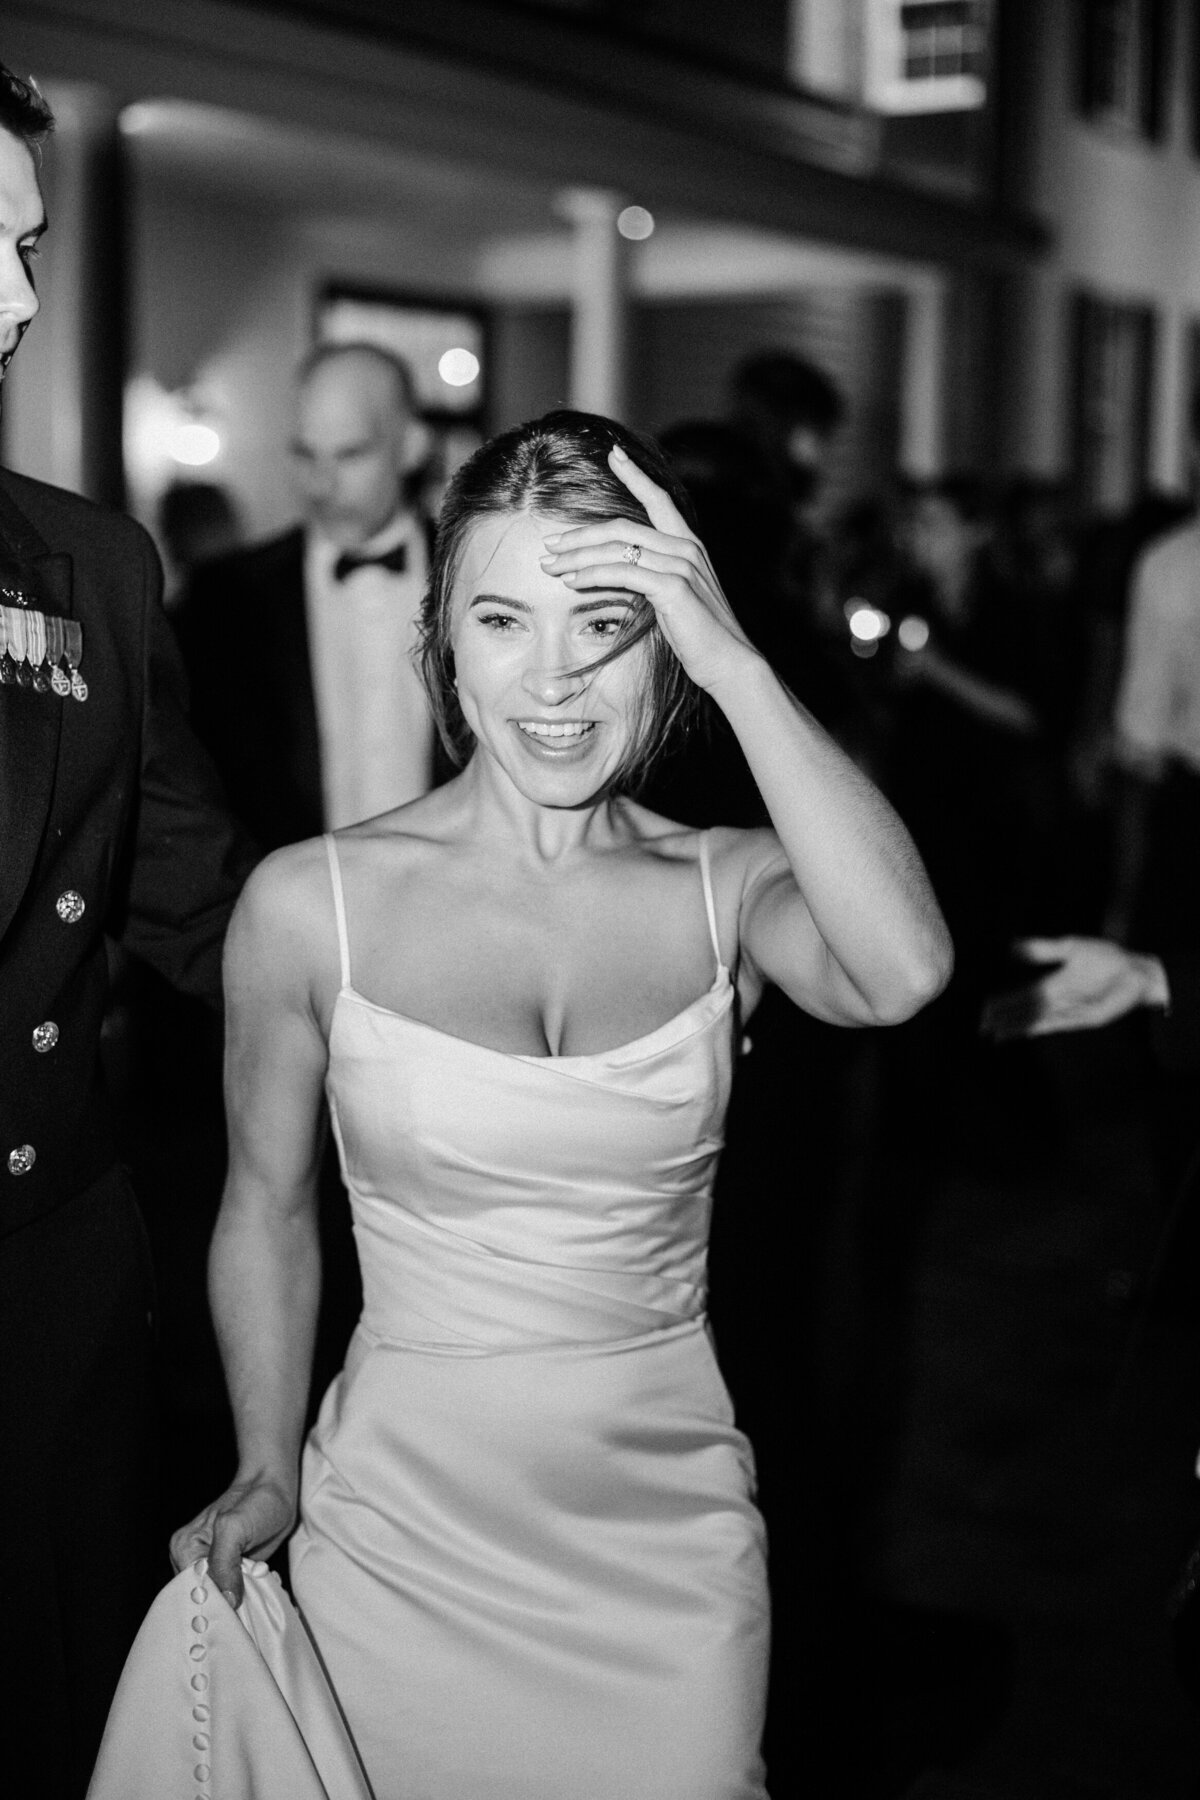 Candid black and white photos during wedding reception